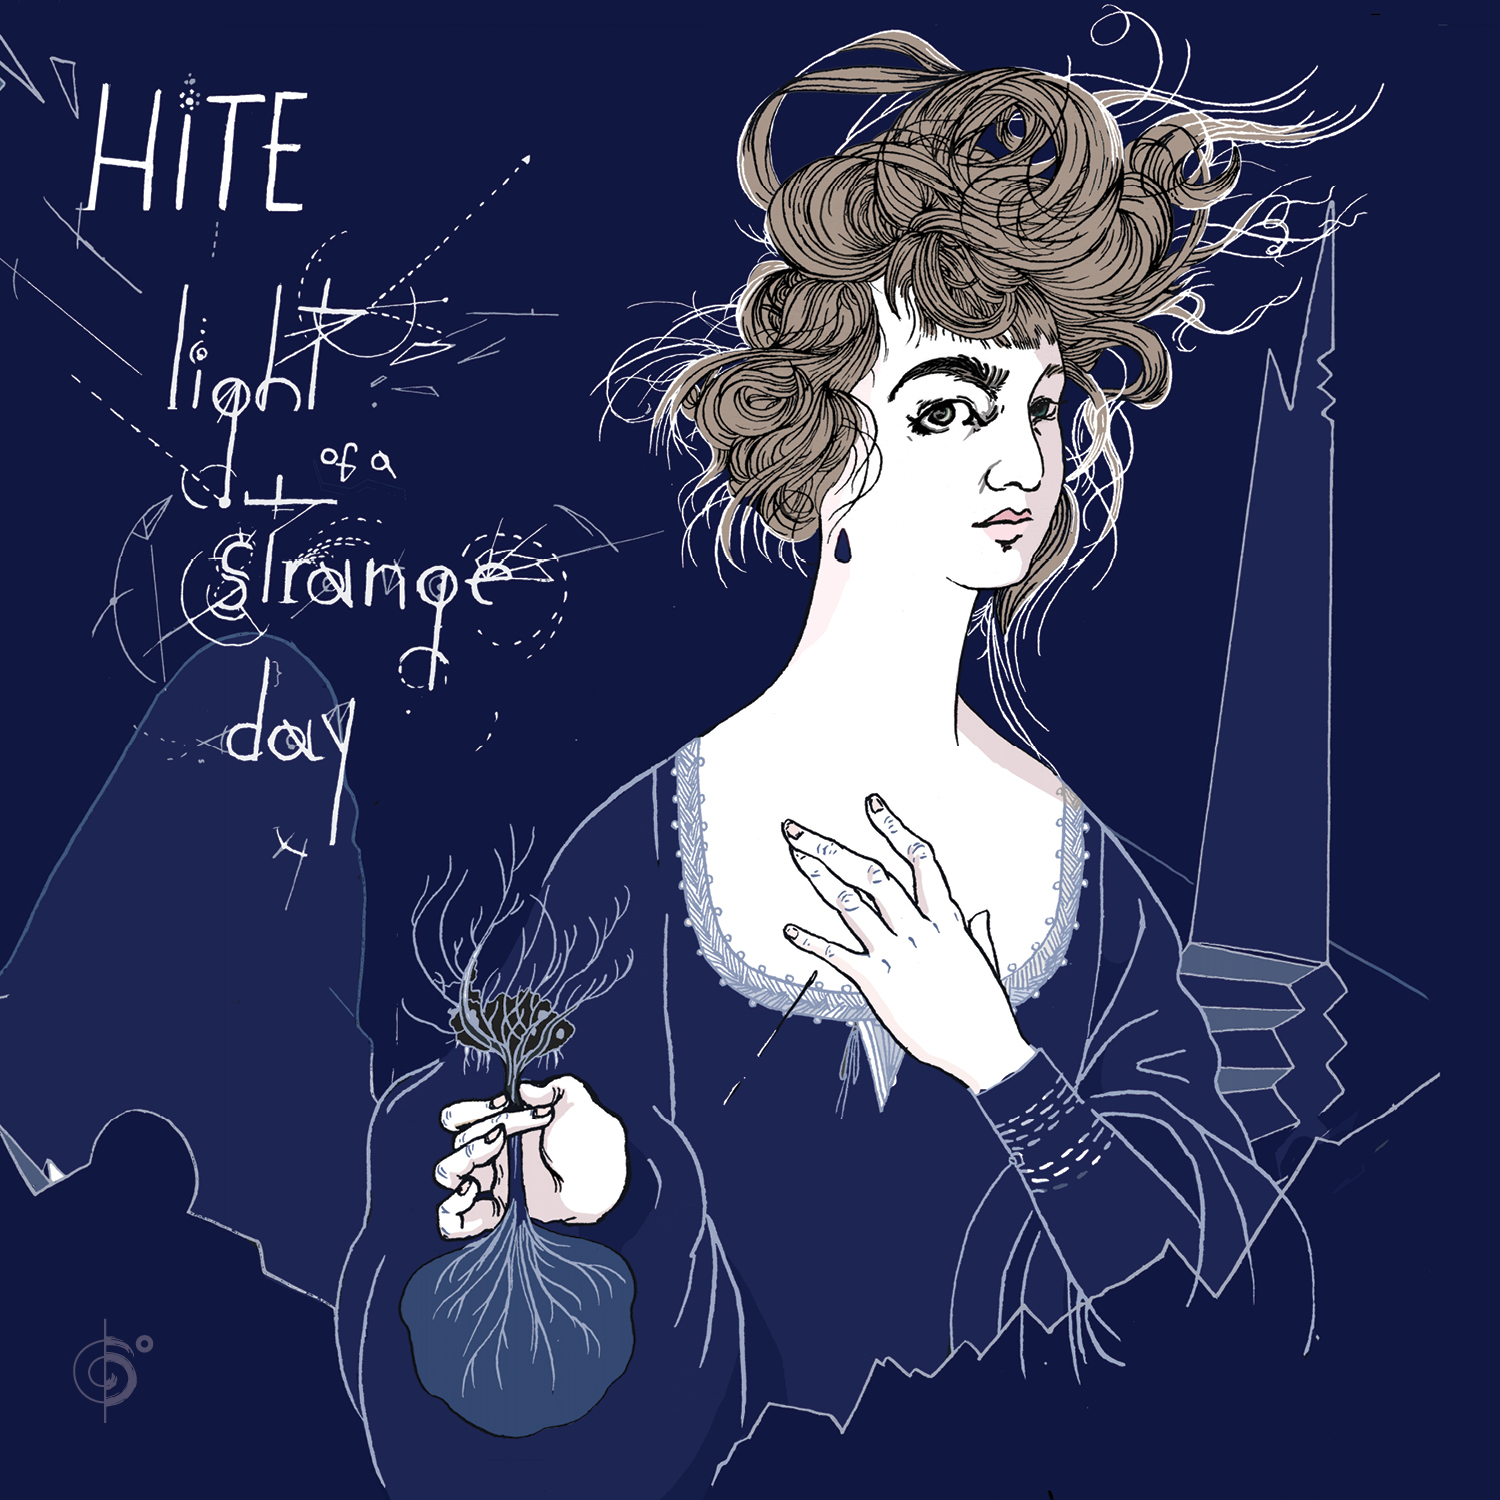 Hite – Light of a strange day out now!